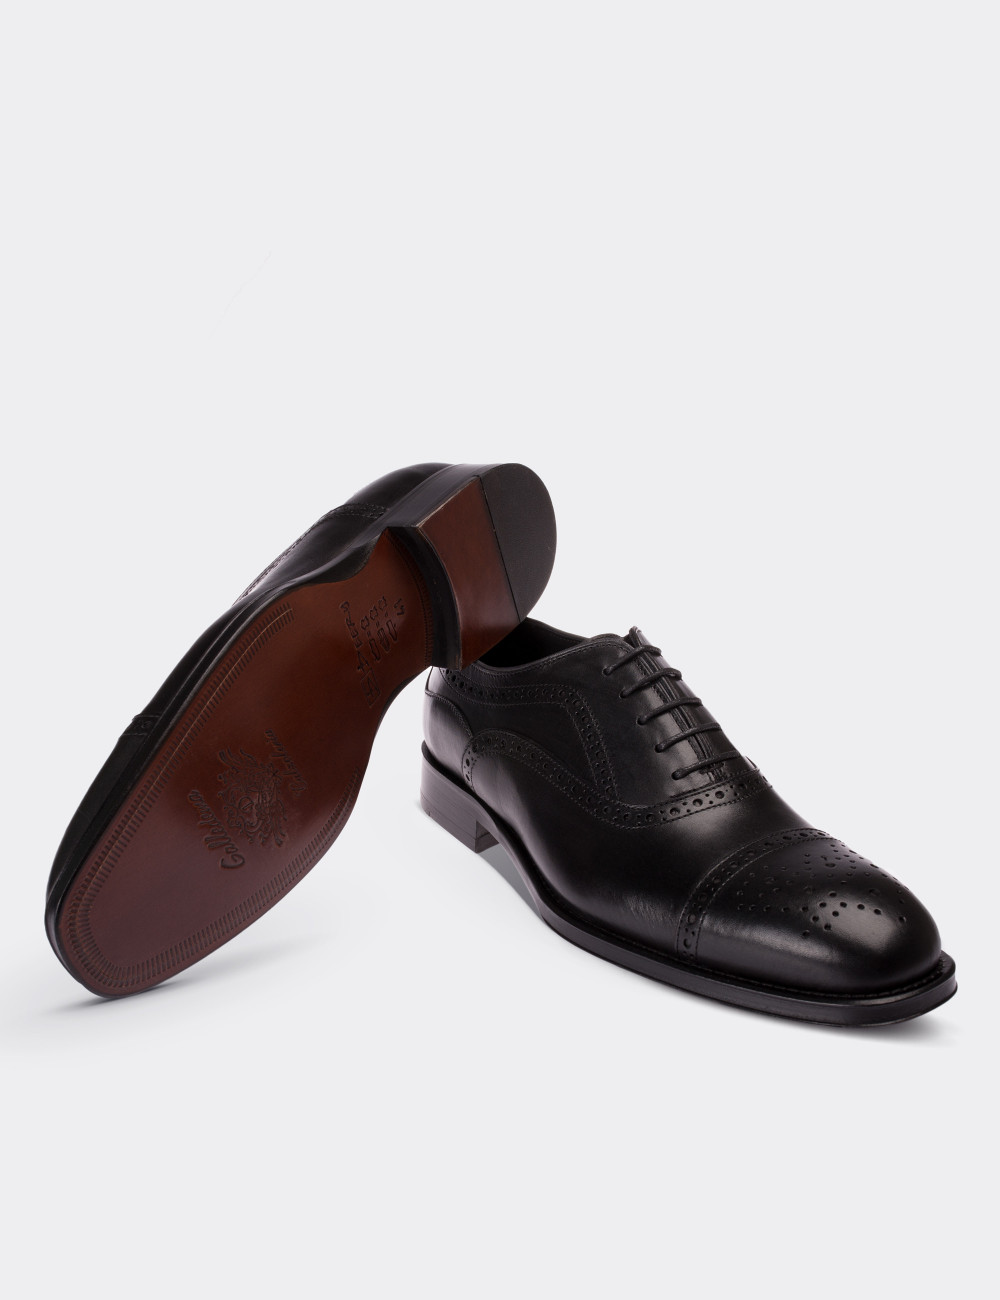 Black  Leather Classic Shoes - 01595MSYHK01